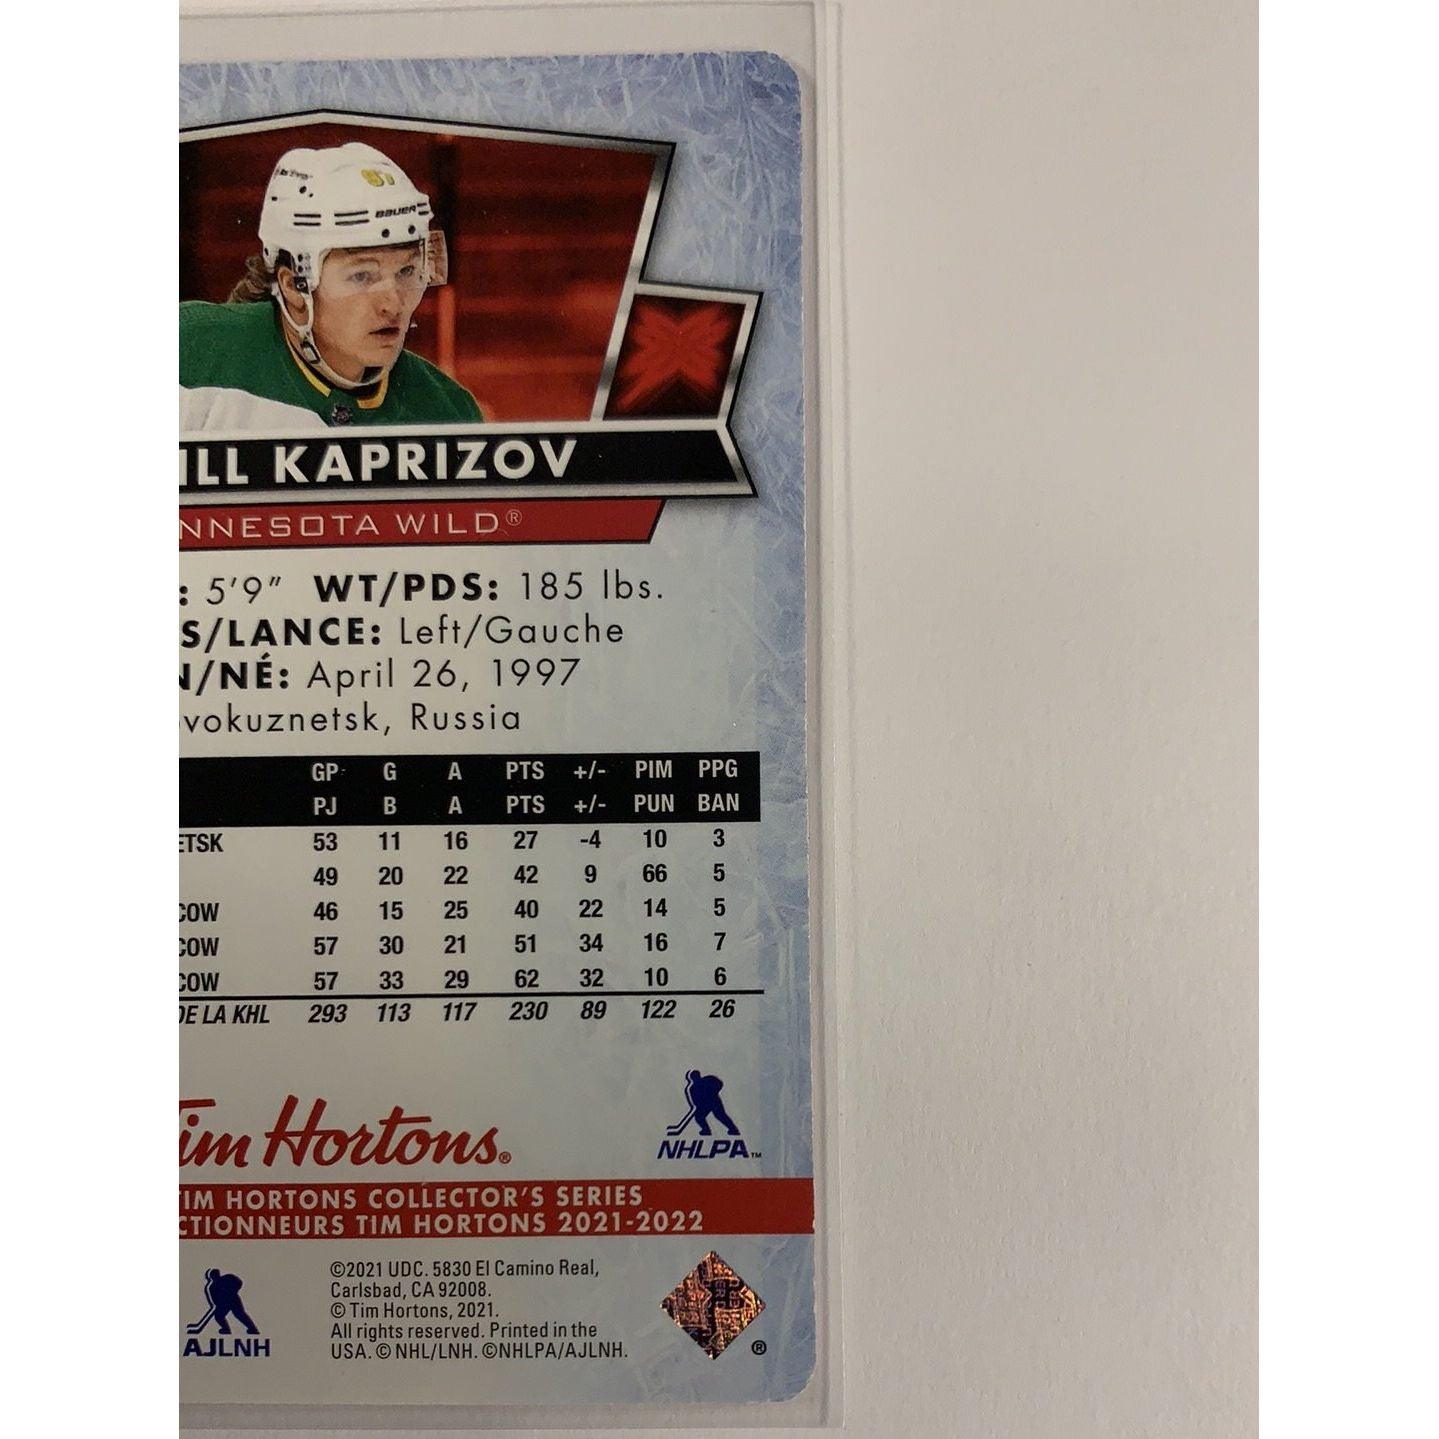  2021-22 Tim Hortons Red Die Cut Kirill Kaprizov  Local Legends Cards & Collectibles